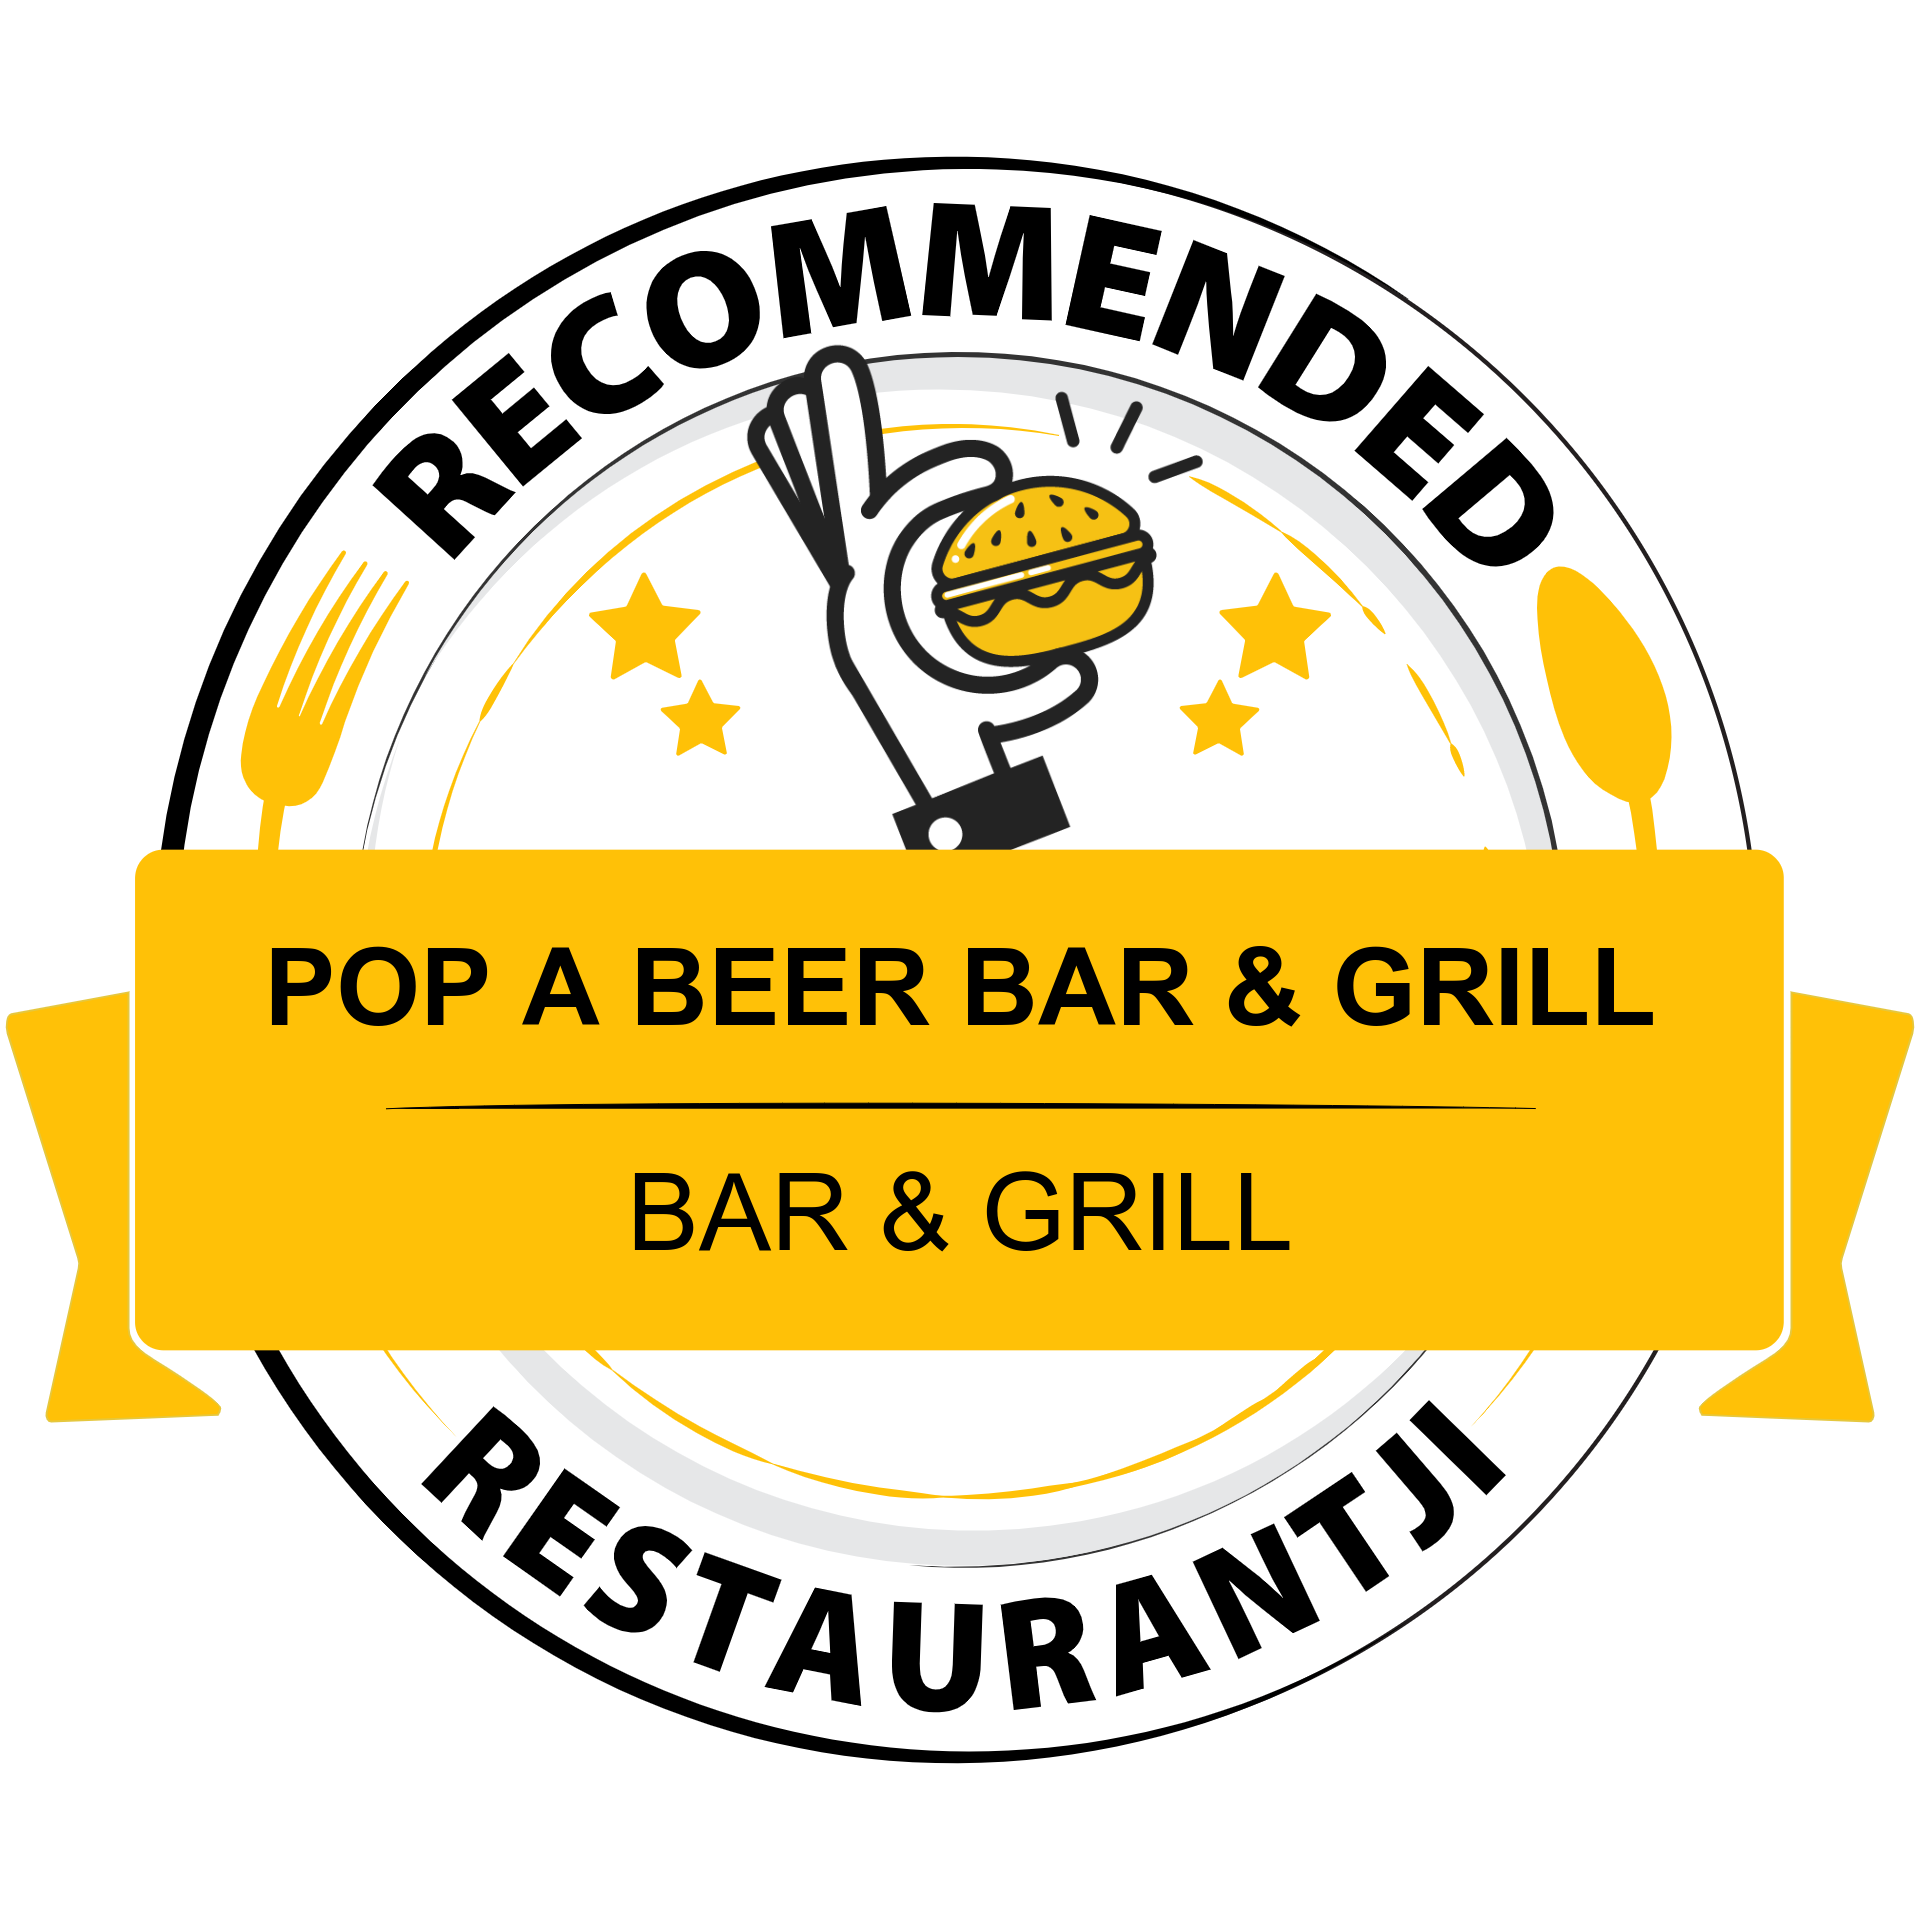 Pop a Beer Bar & Grill is a must-visit according to Restaurantji